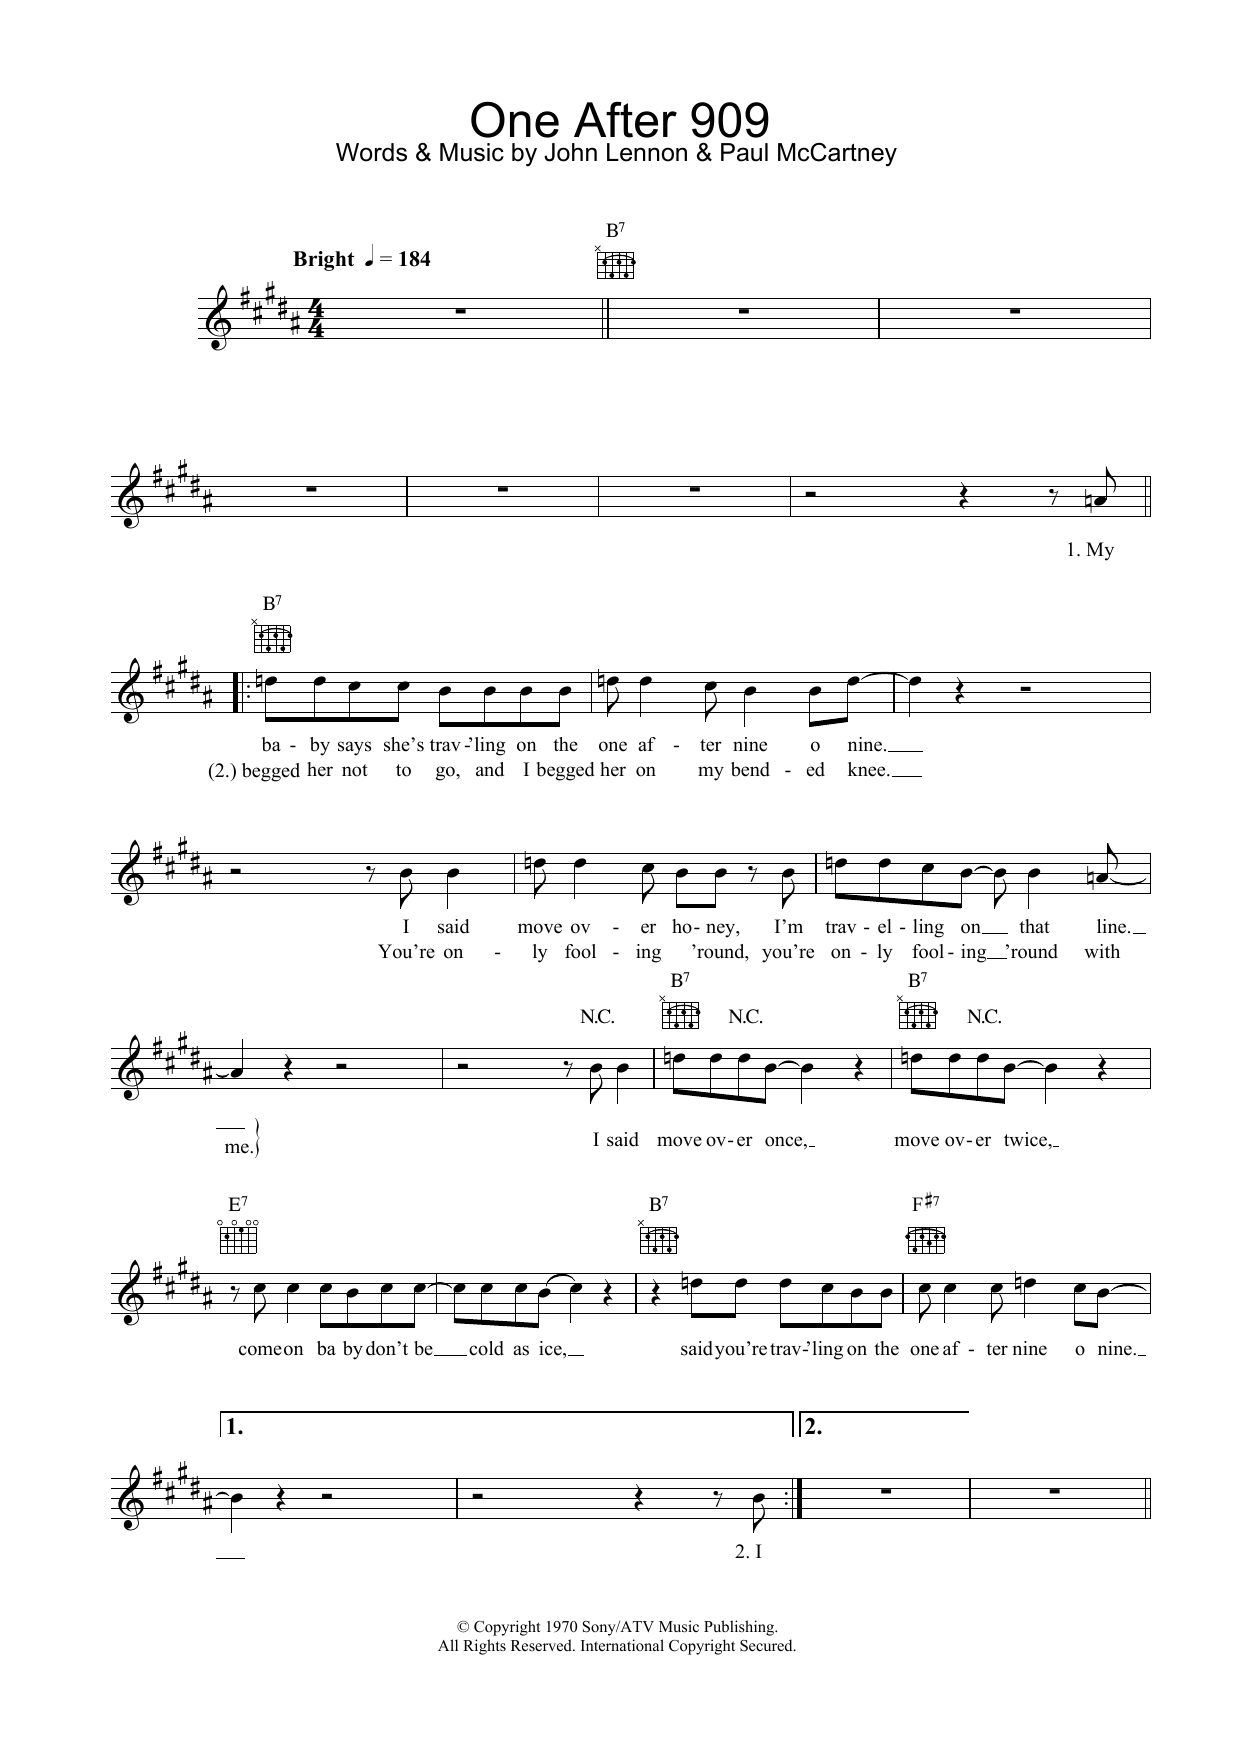 Download The Beatles One After 909 Sheet Music